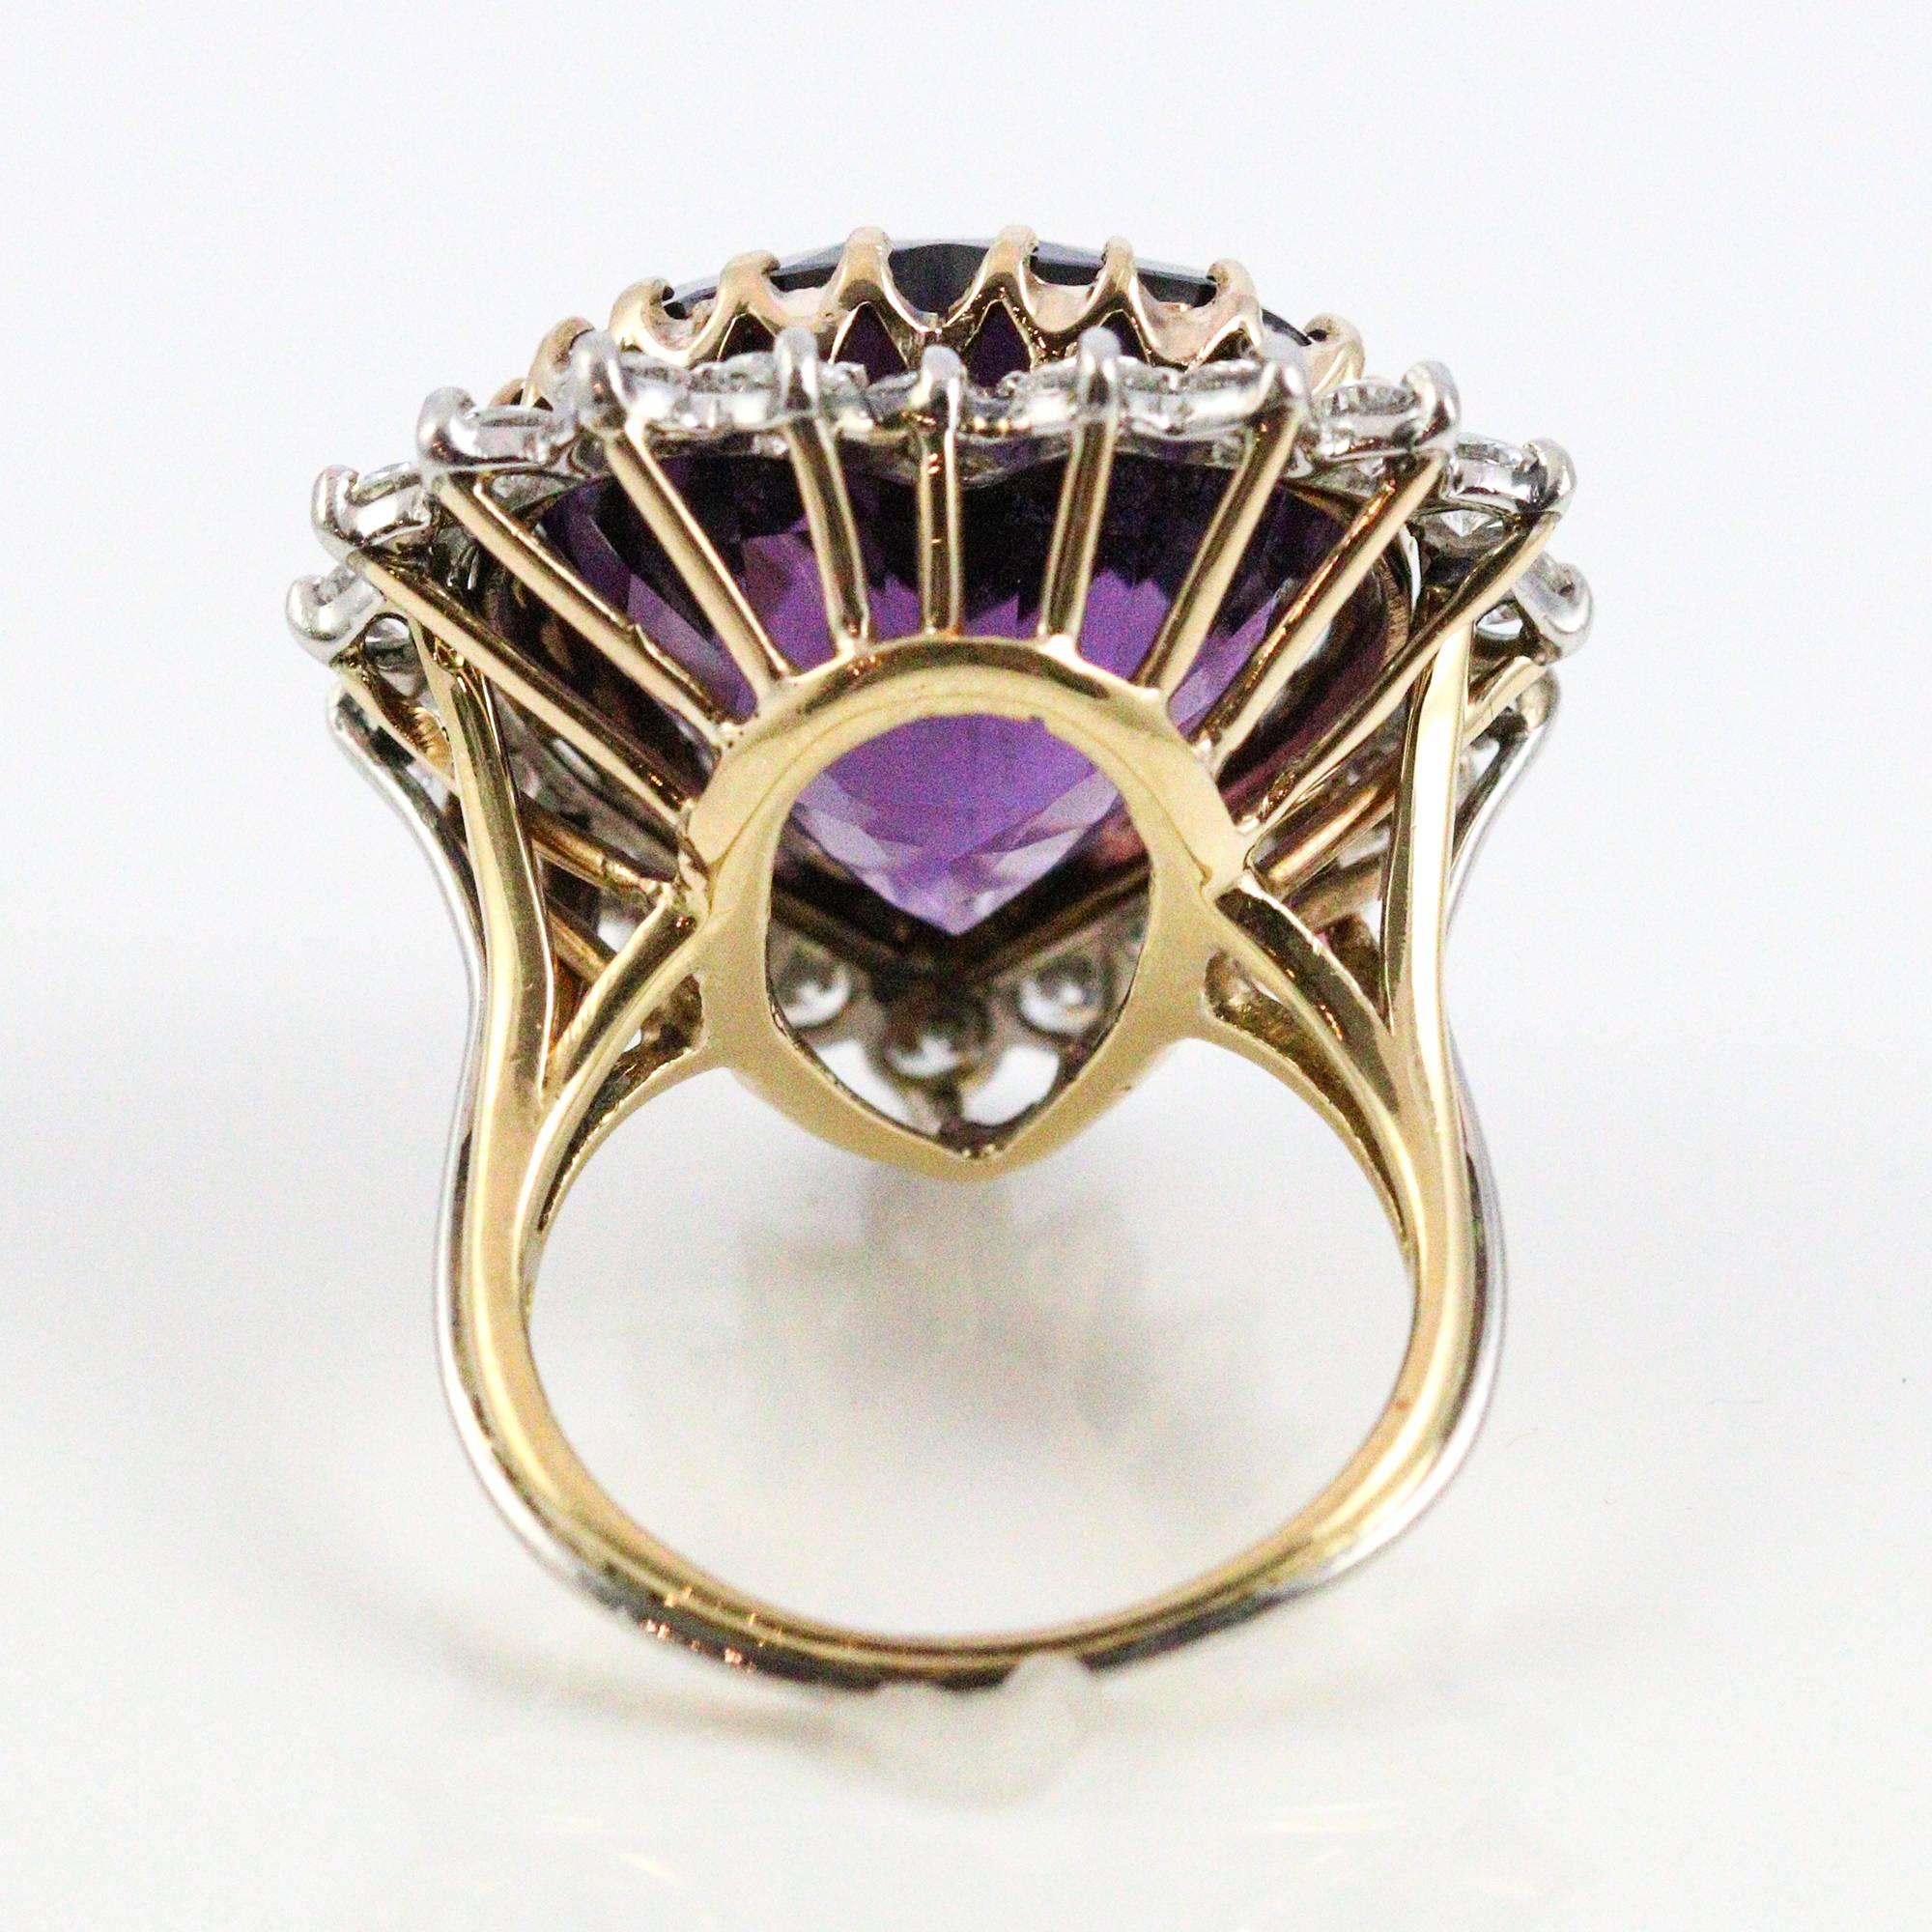 1950s Retro 12 Carat Approximate Heart Shaped Amethyst and Diamond Ring 1